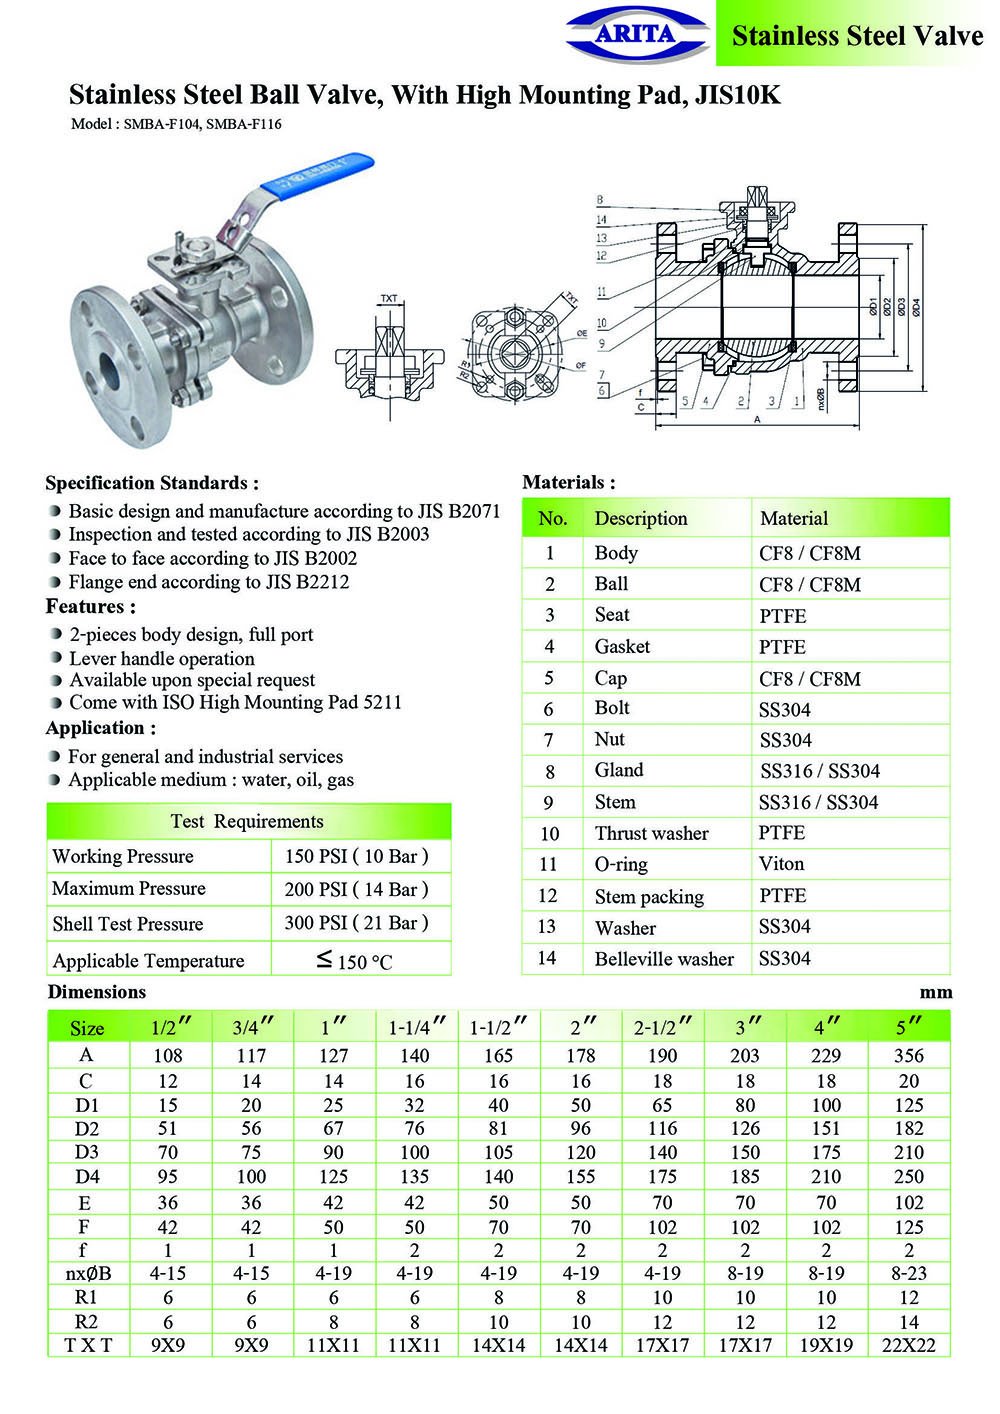 Stainless Steel Ball Valve, With High Mounting Pad, JIS10K